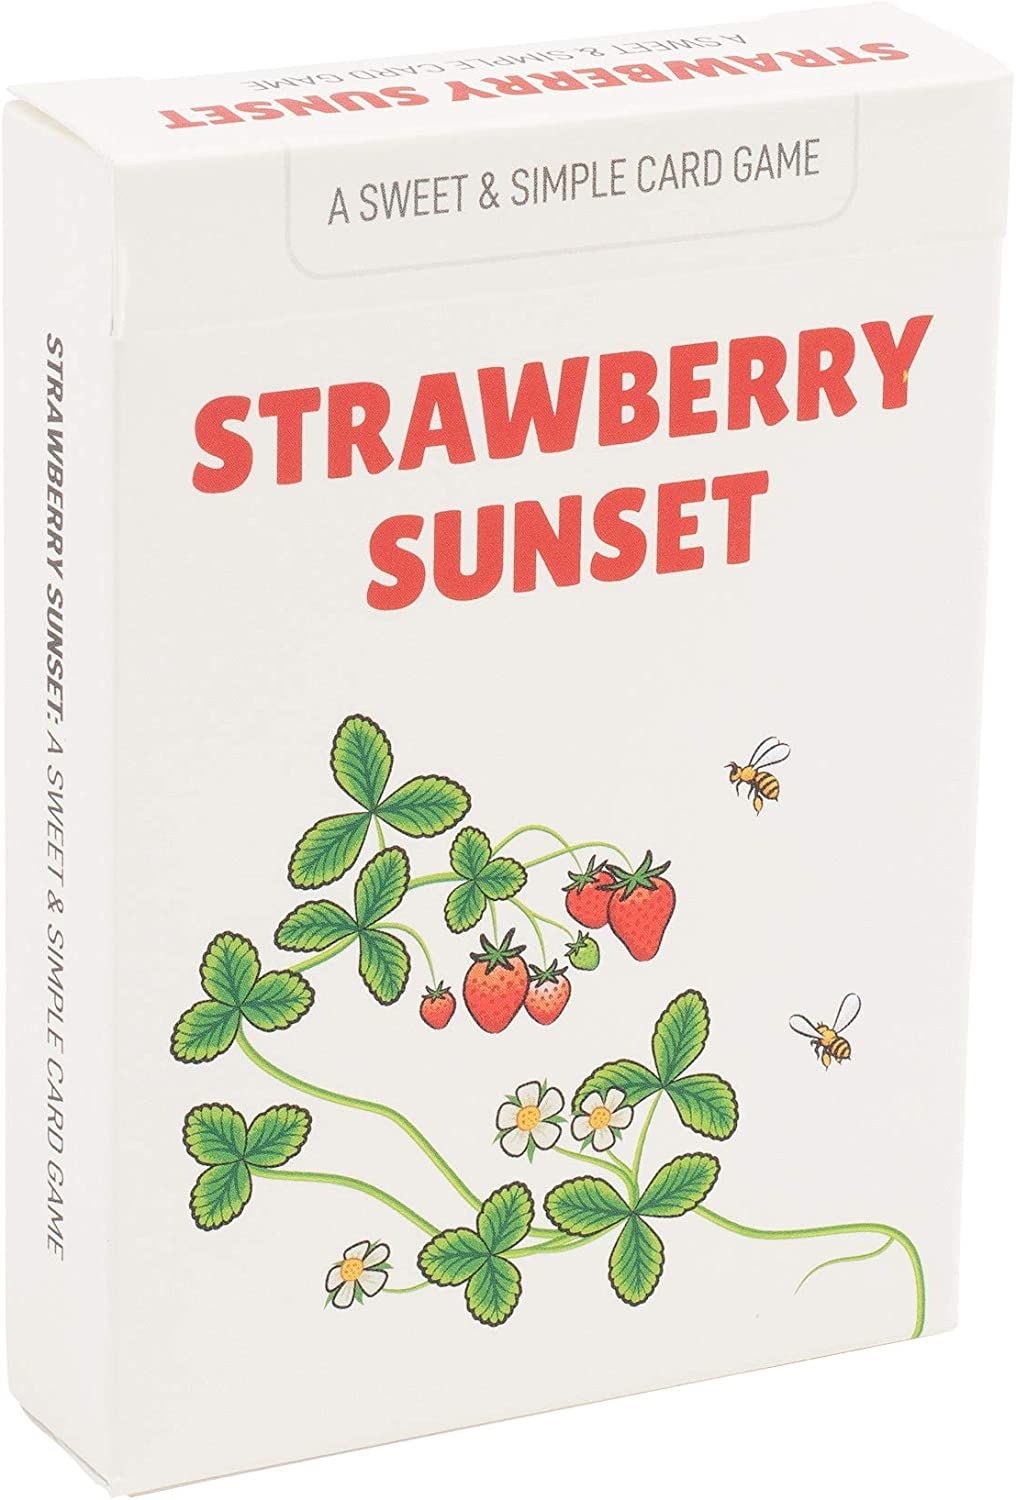 Strawberry Sunset is one of the most beautiful board games for kids